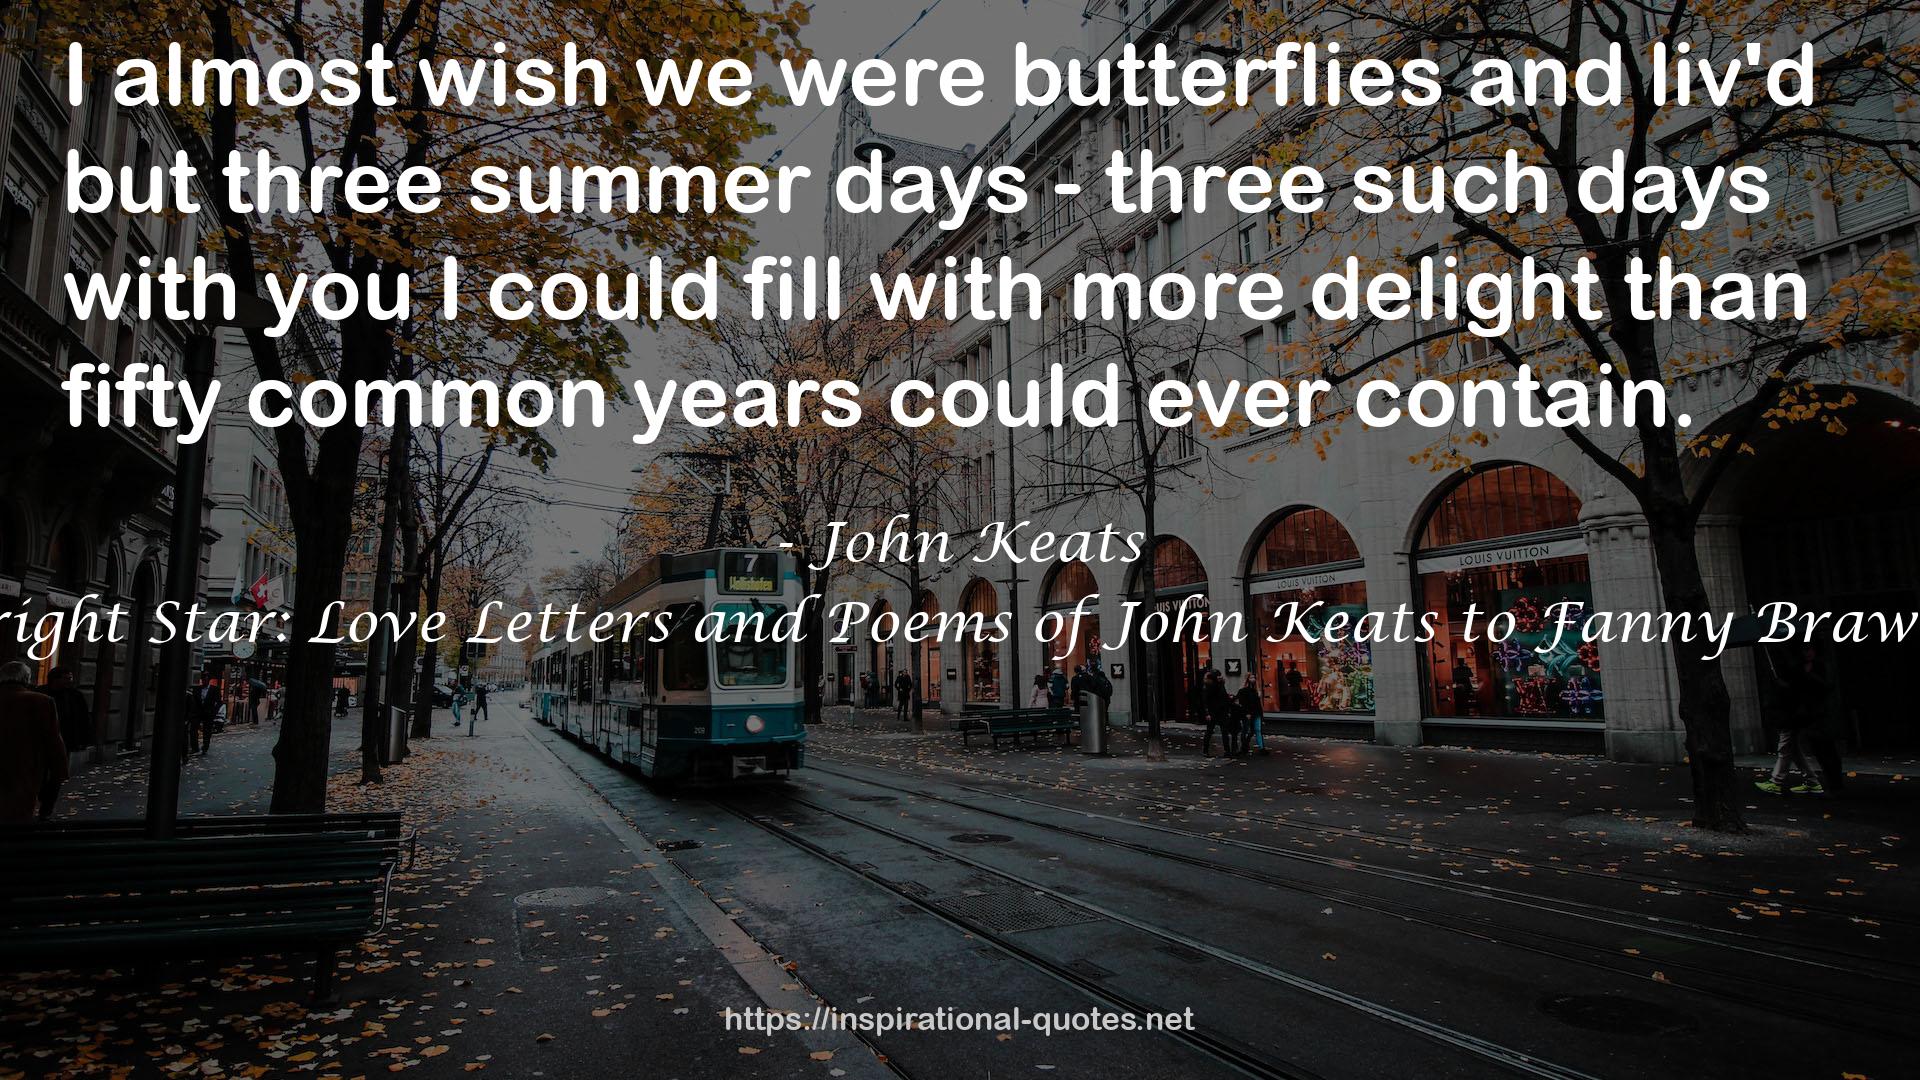 butterflies  QUOTES